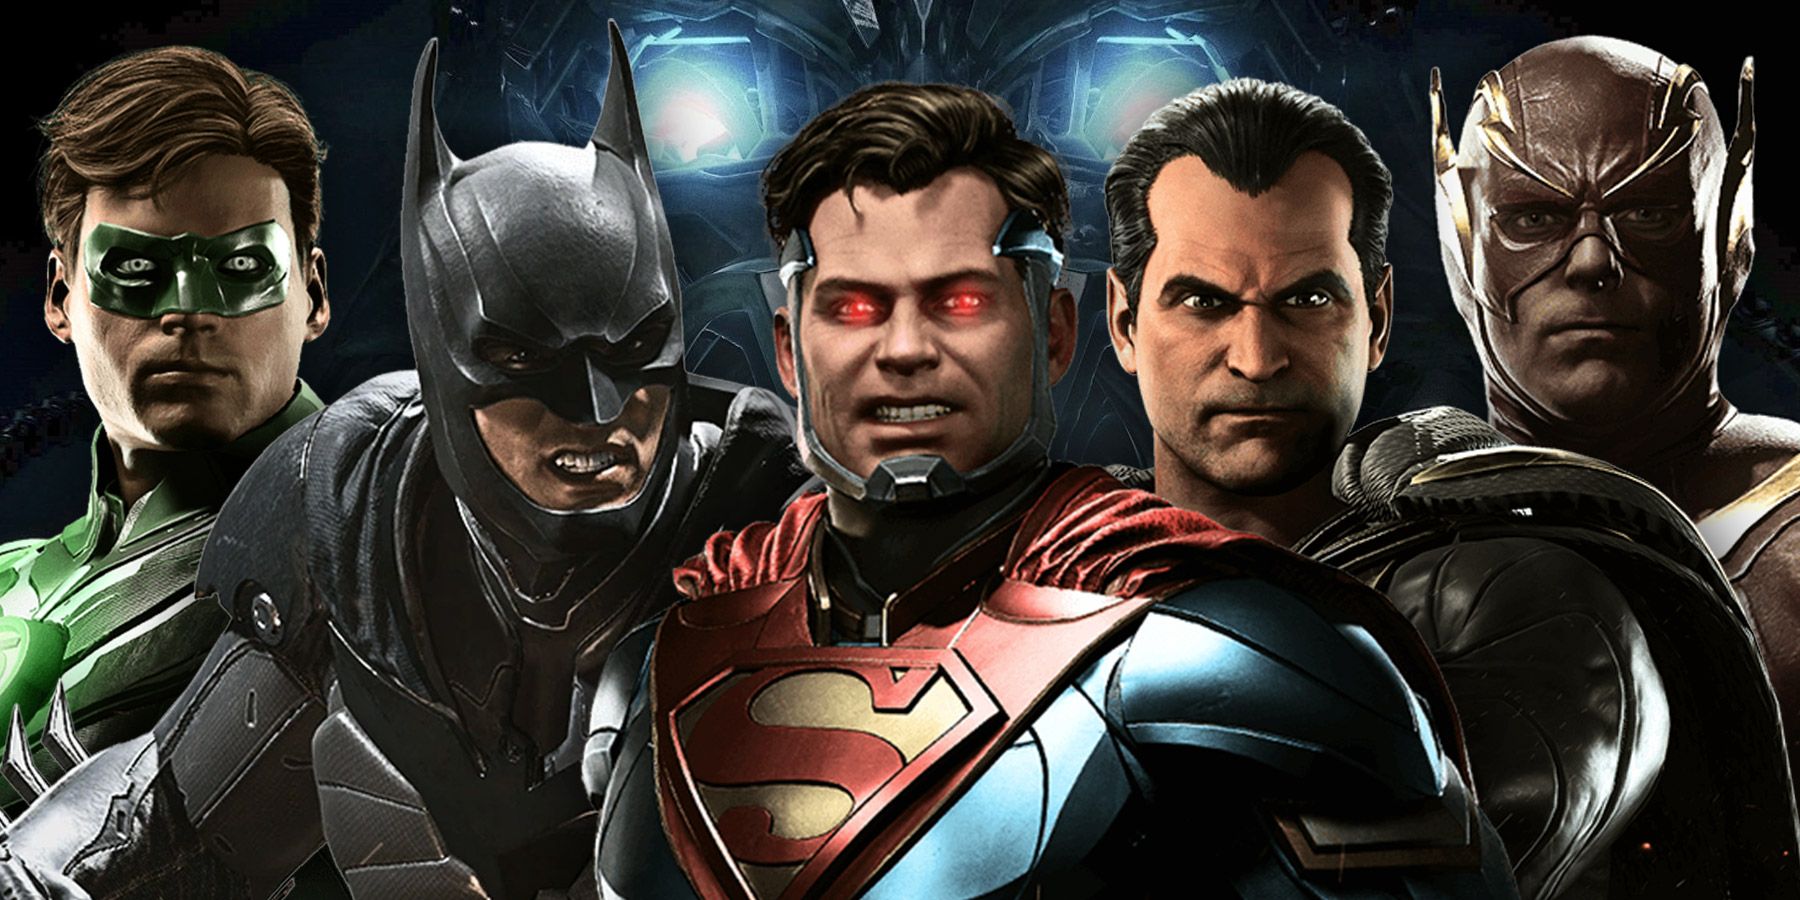 Injustice 3 Wrong Direction